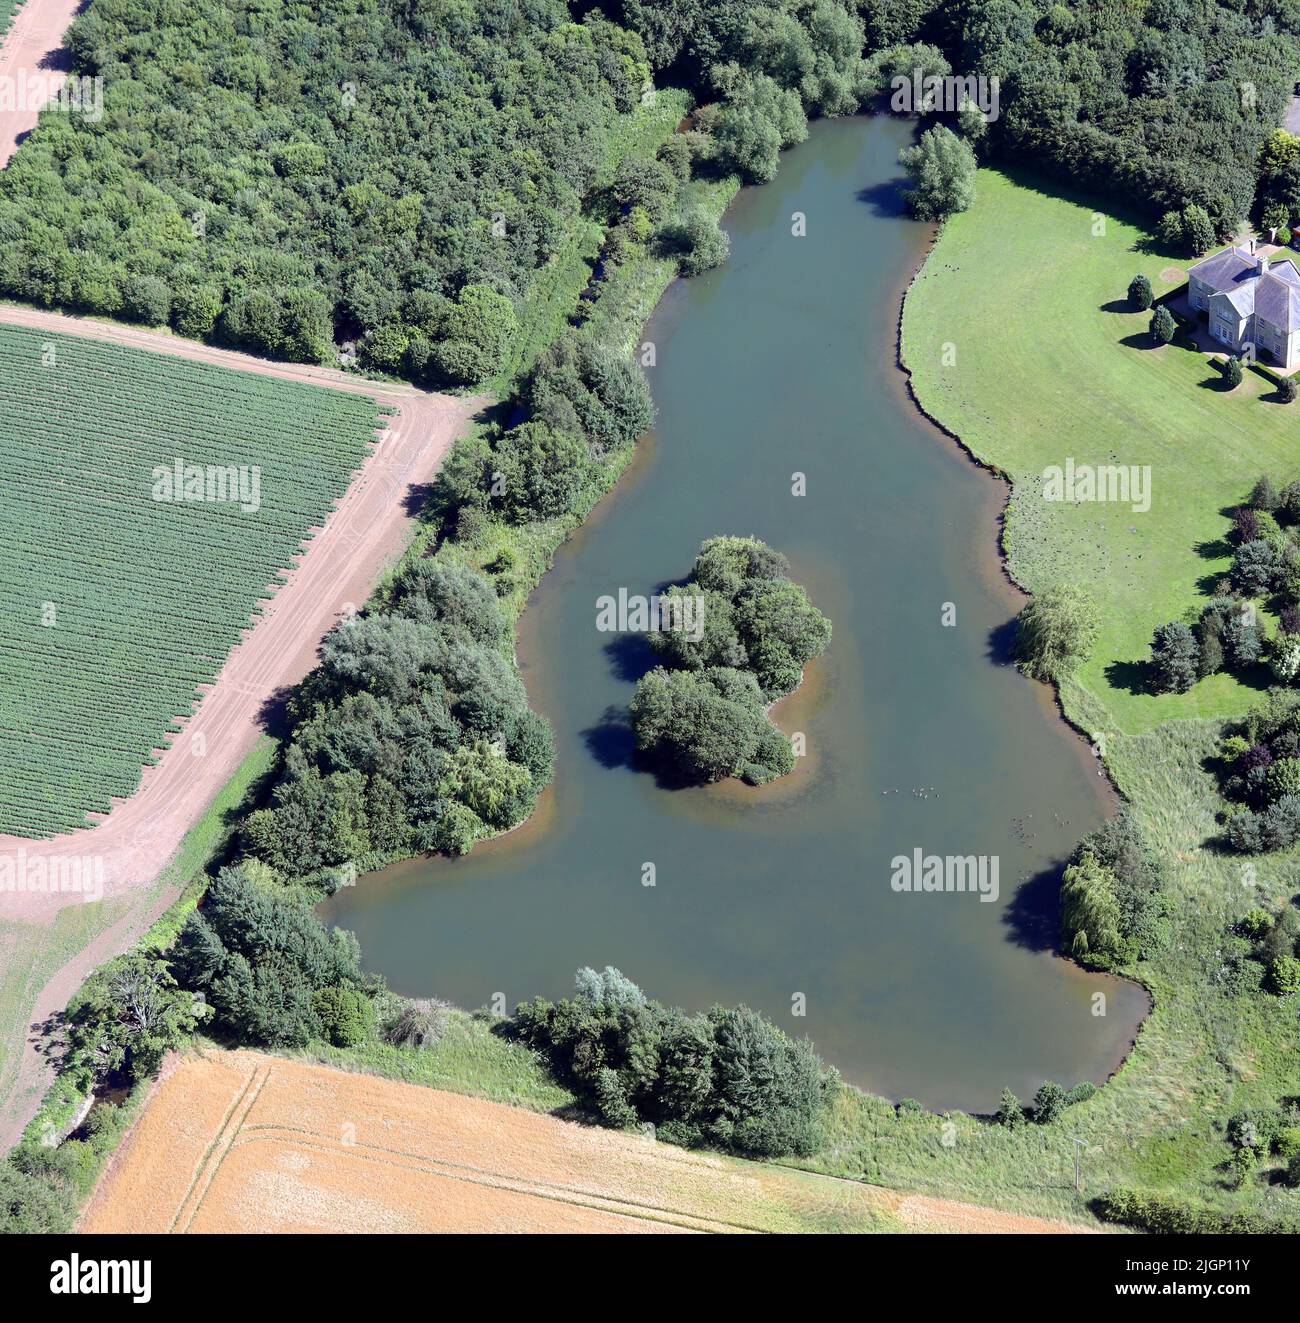 Aerial view of a private lake similar to the shape of England. Melsonby, North Yorkshire. Stock Photo